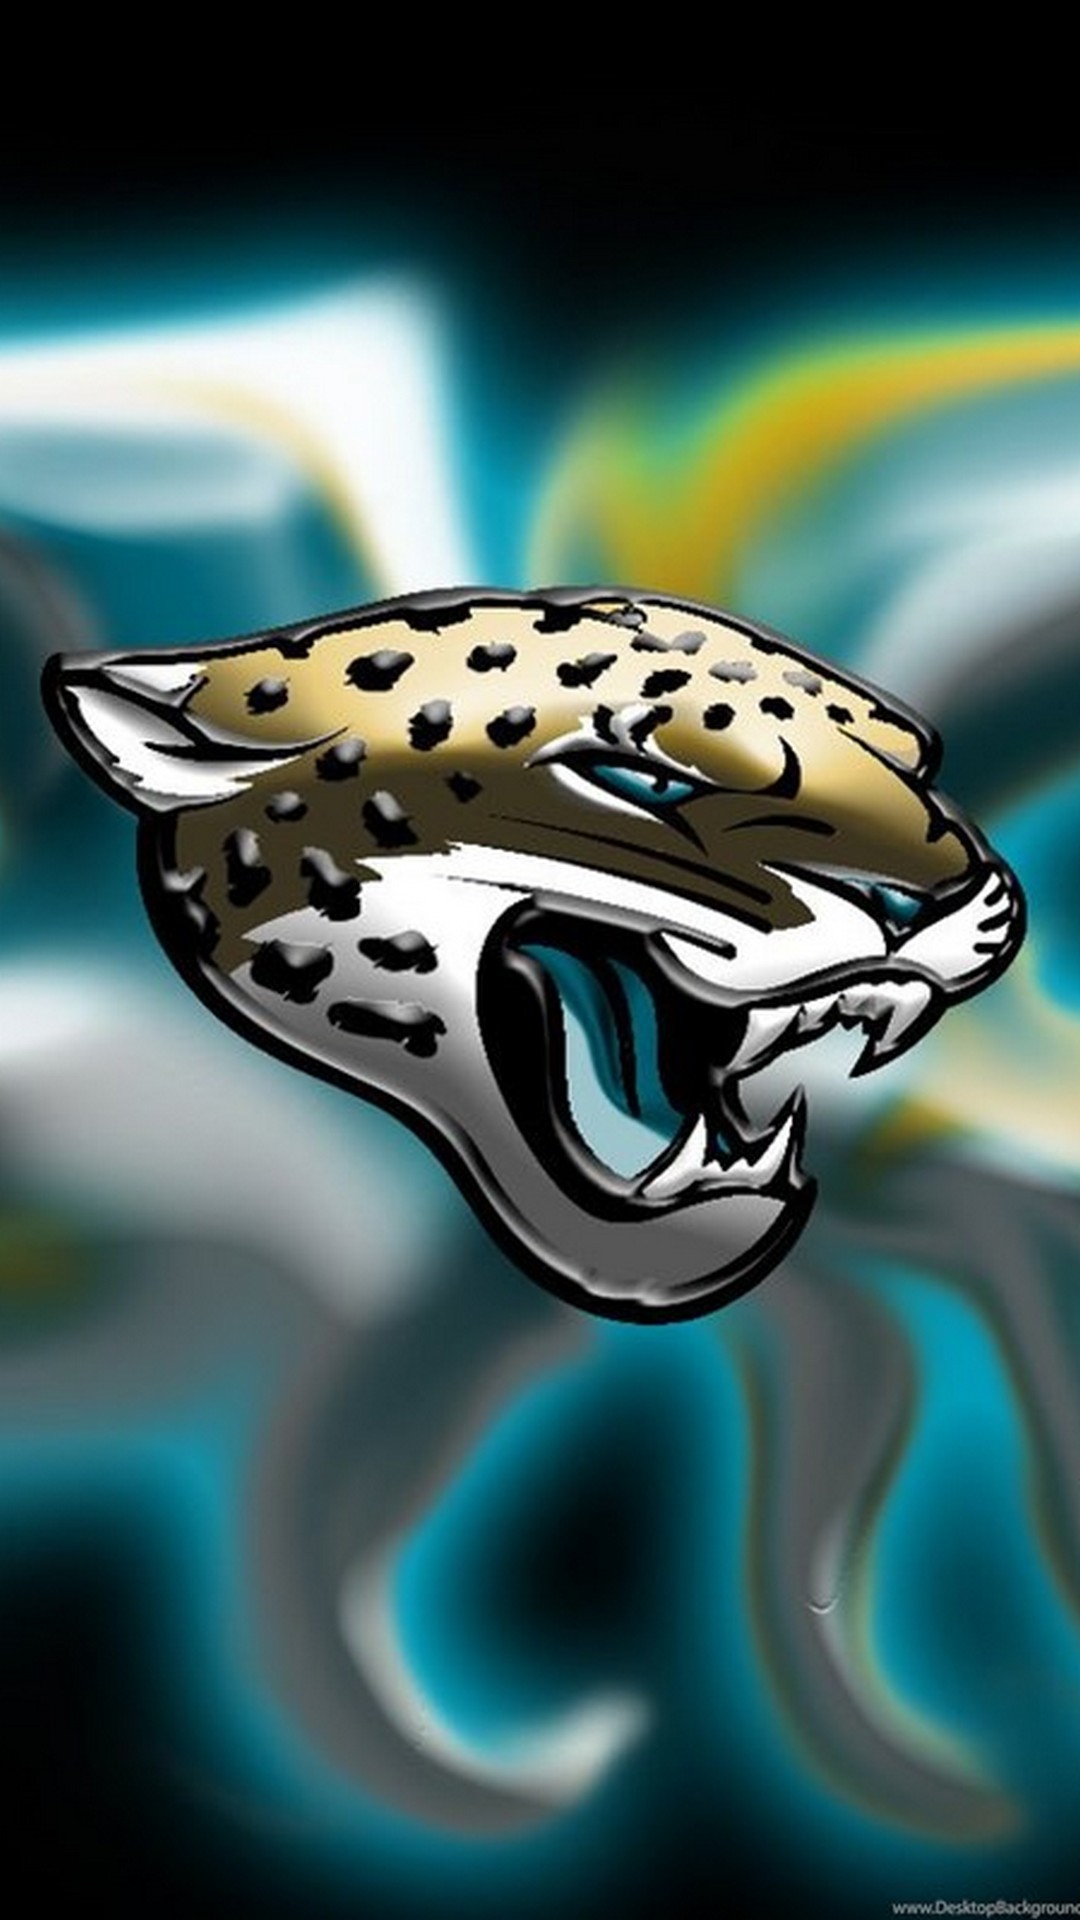 Jacksonville Jaguars iPhone Screensaver with high-resolution 1080x1920 pixel. Donwload and set as wallpaper for your iPhone X, iPhone XS home screen backgrounds, XS Max, XR, iPhone8 lock screen wallpaper, iPhone 7, 6, SE and other mobile devices